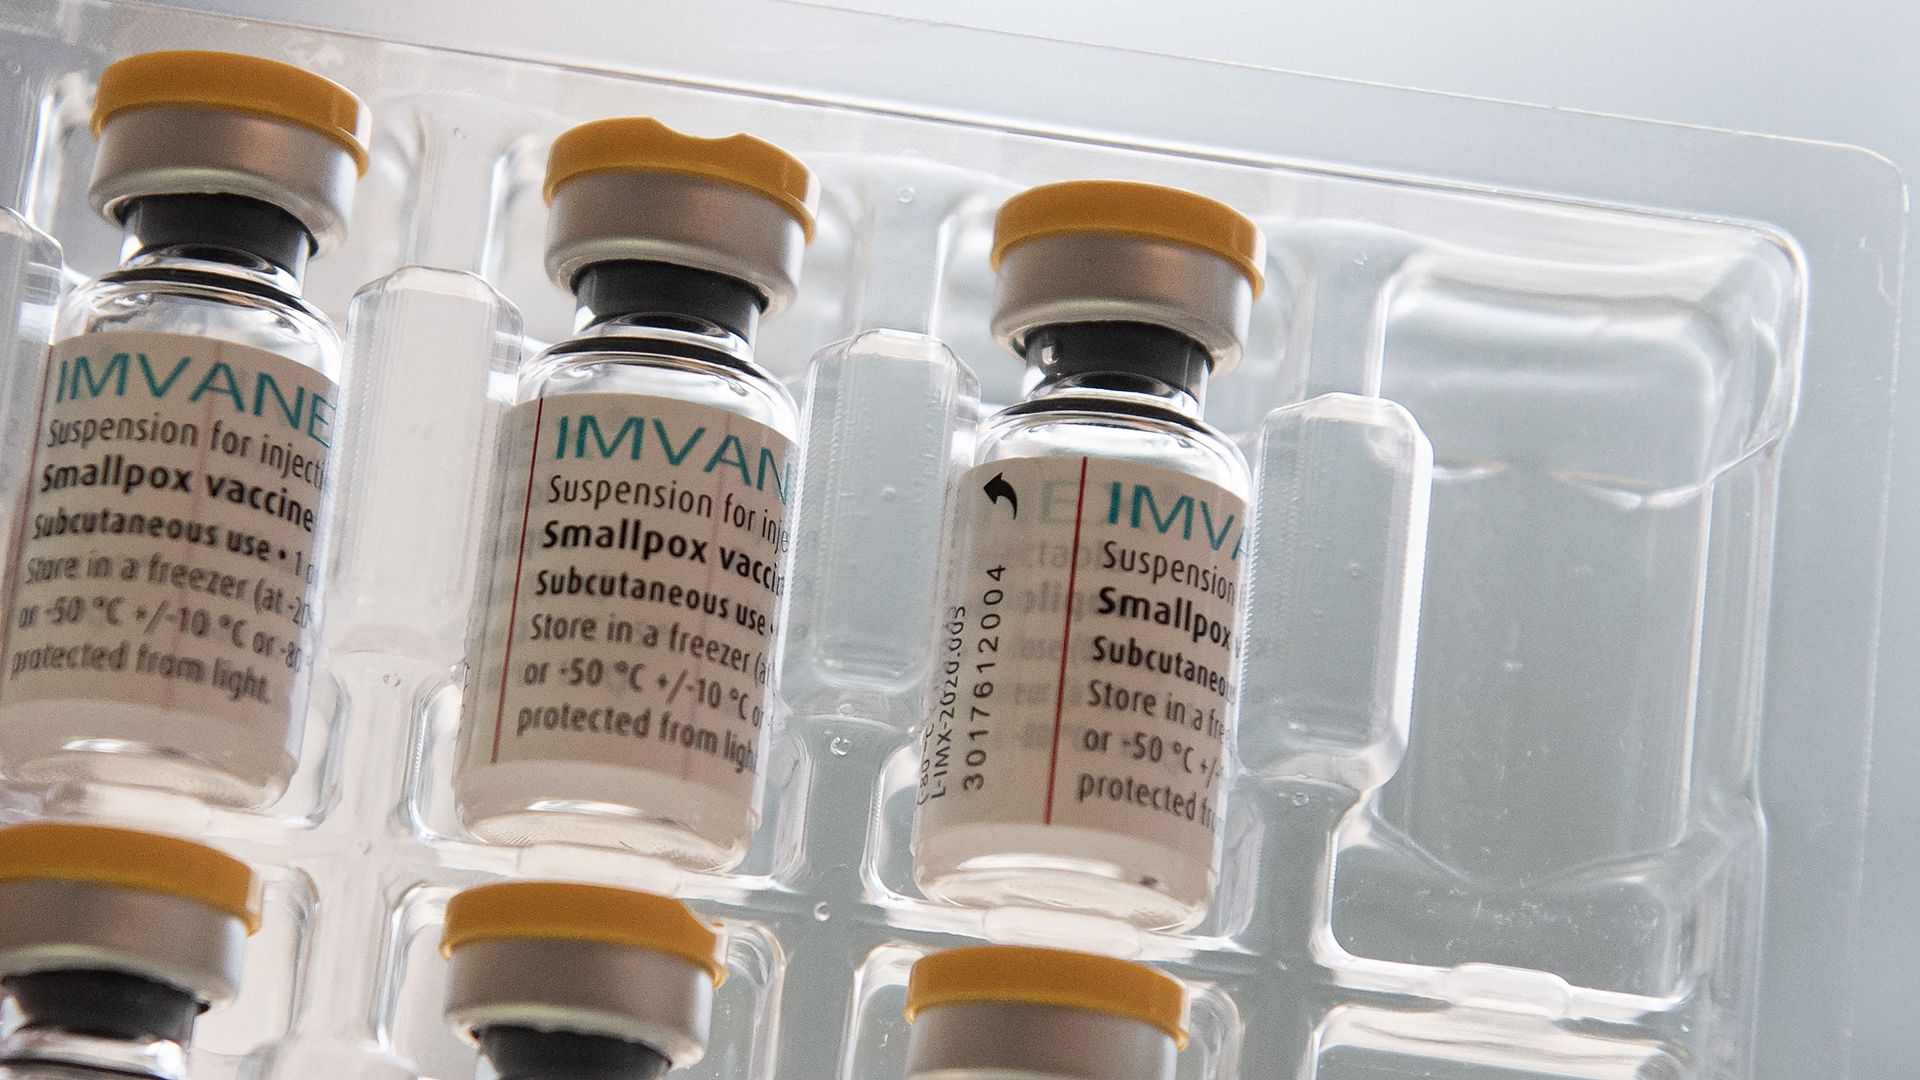 A photograph shows doses of Imvanex vaccine used to protect against Monkeypox virus.